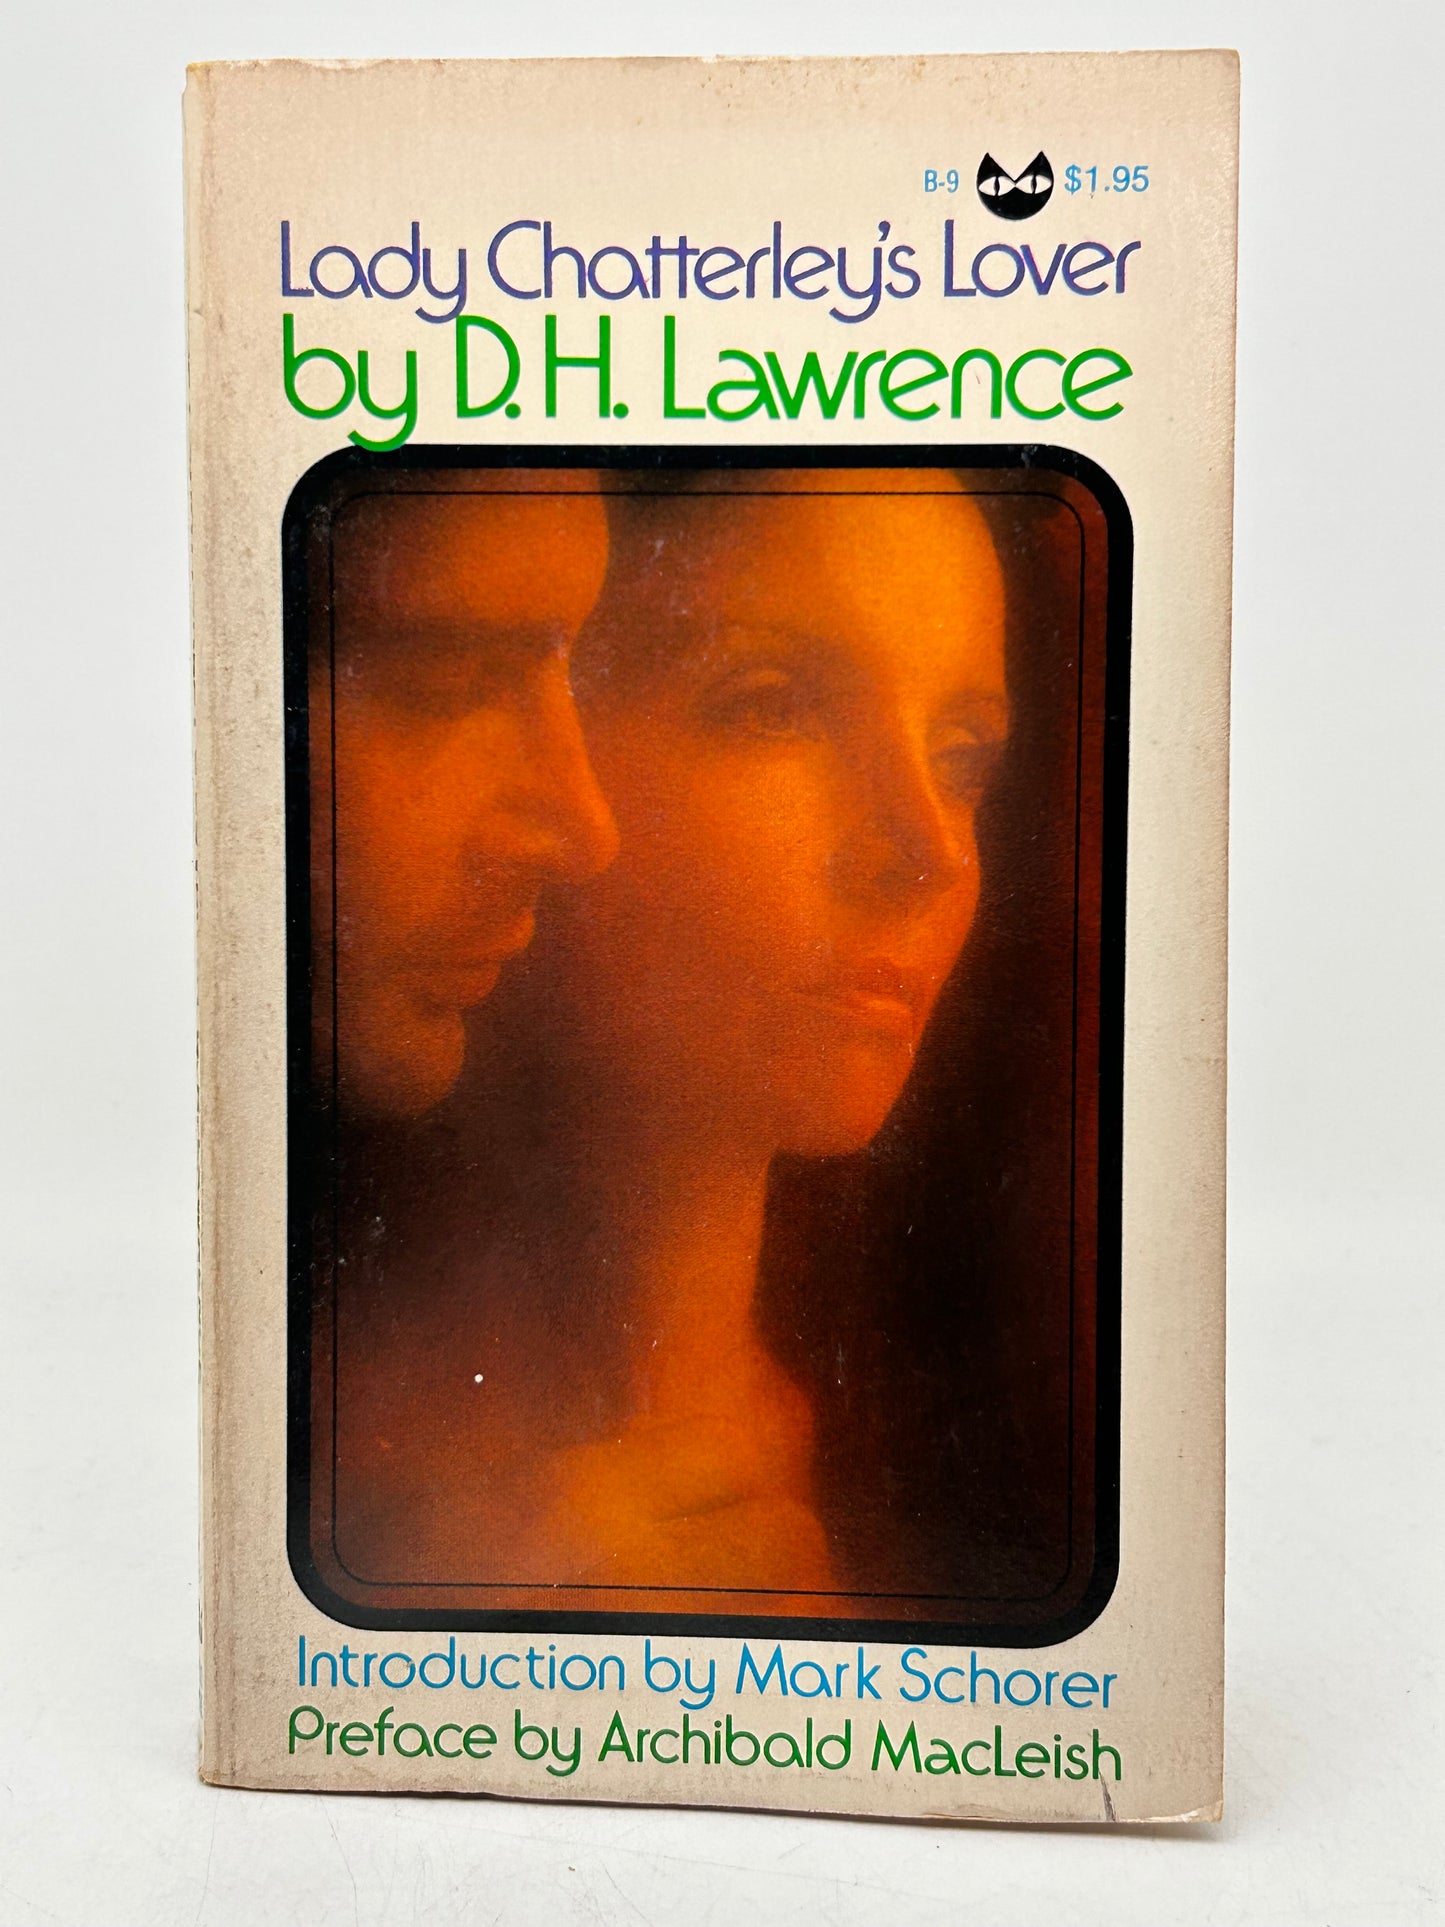 Lady Chatterley's Lover GROVE/BLACK CAT Paperback D.H. Lawrence SF06